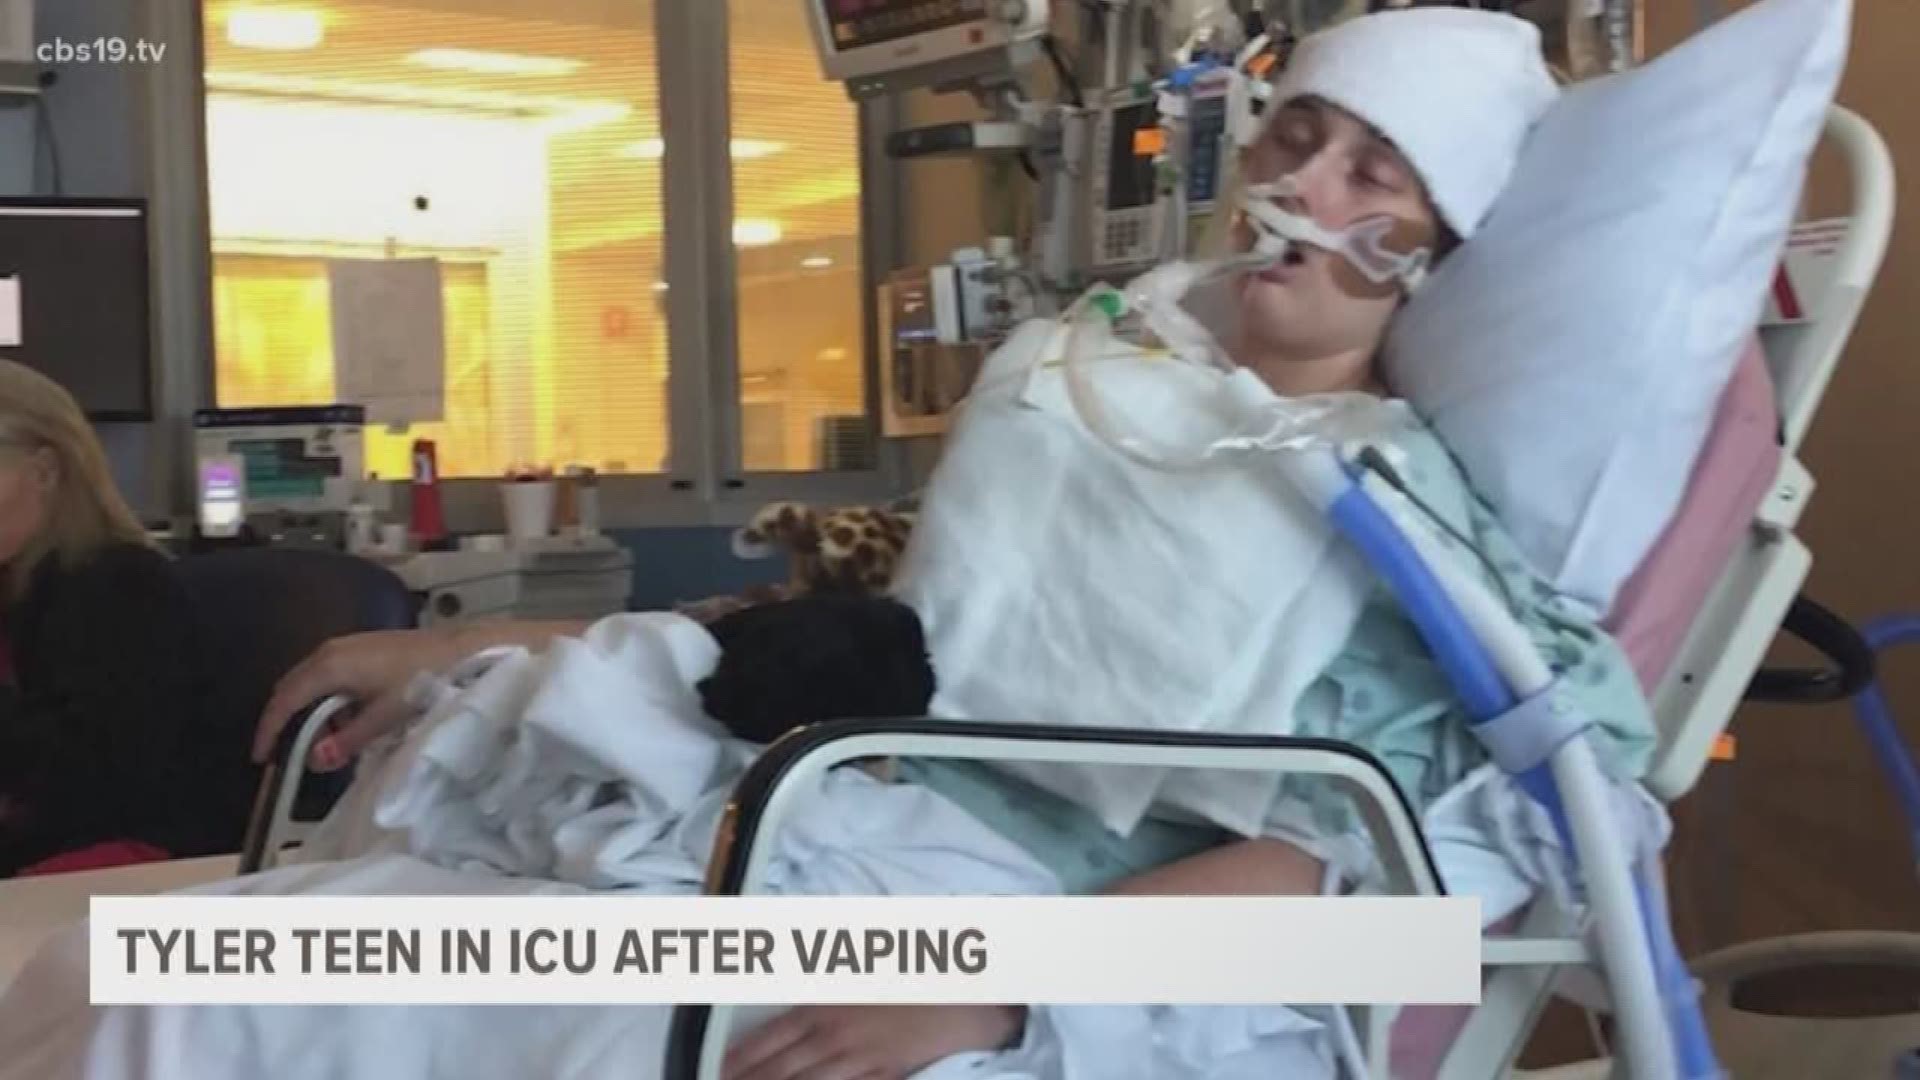 Witney Livingston may spend the rest of her life using a breathing machine. The reason might be due to vaping.